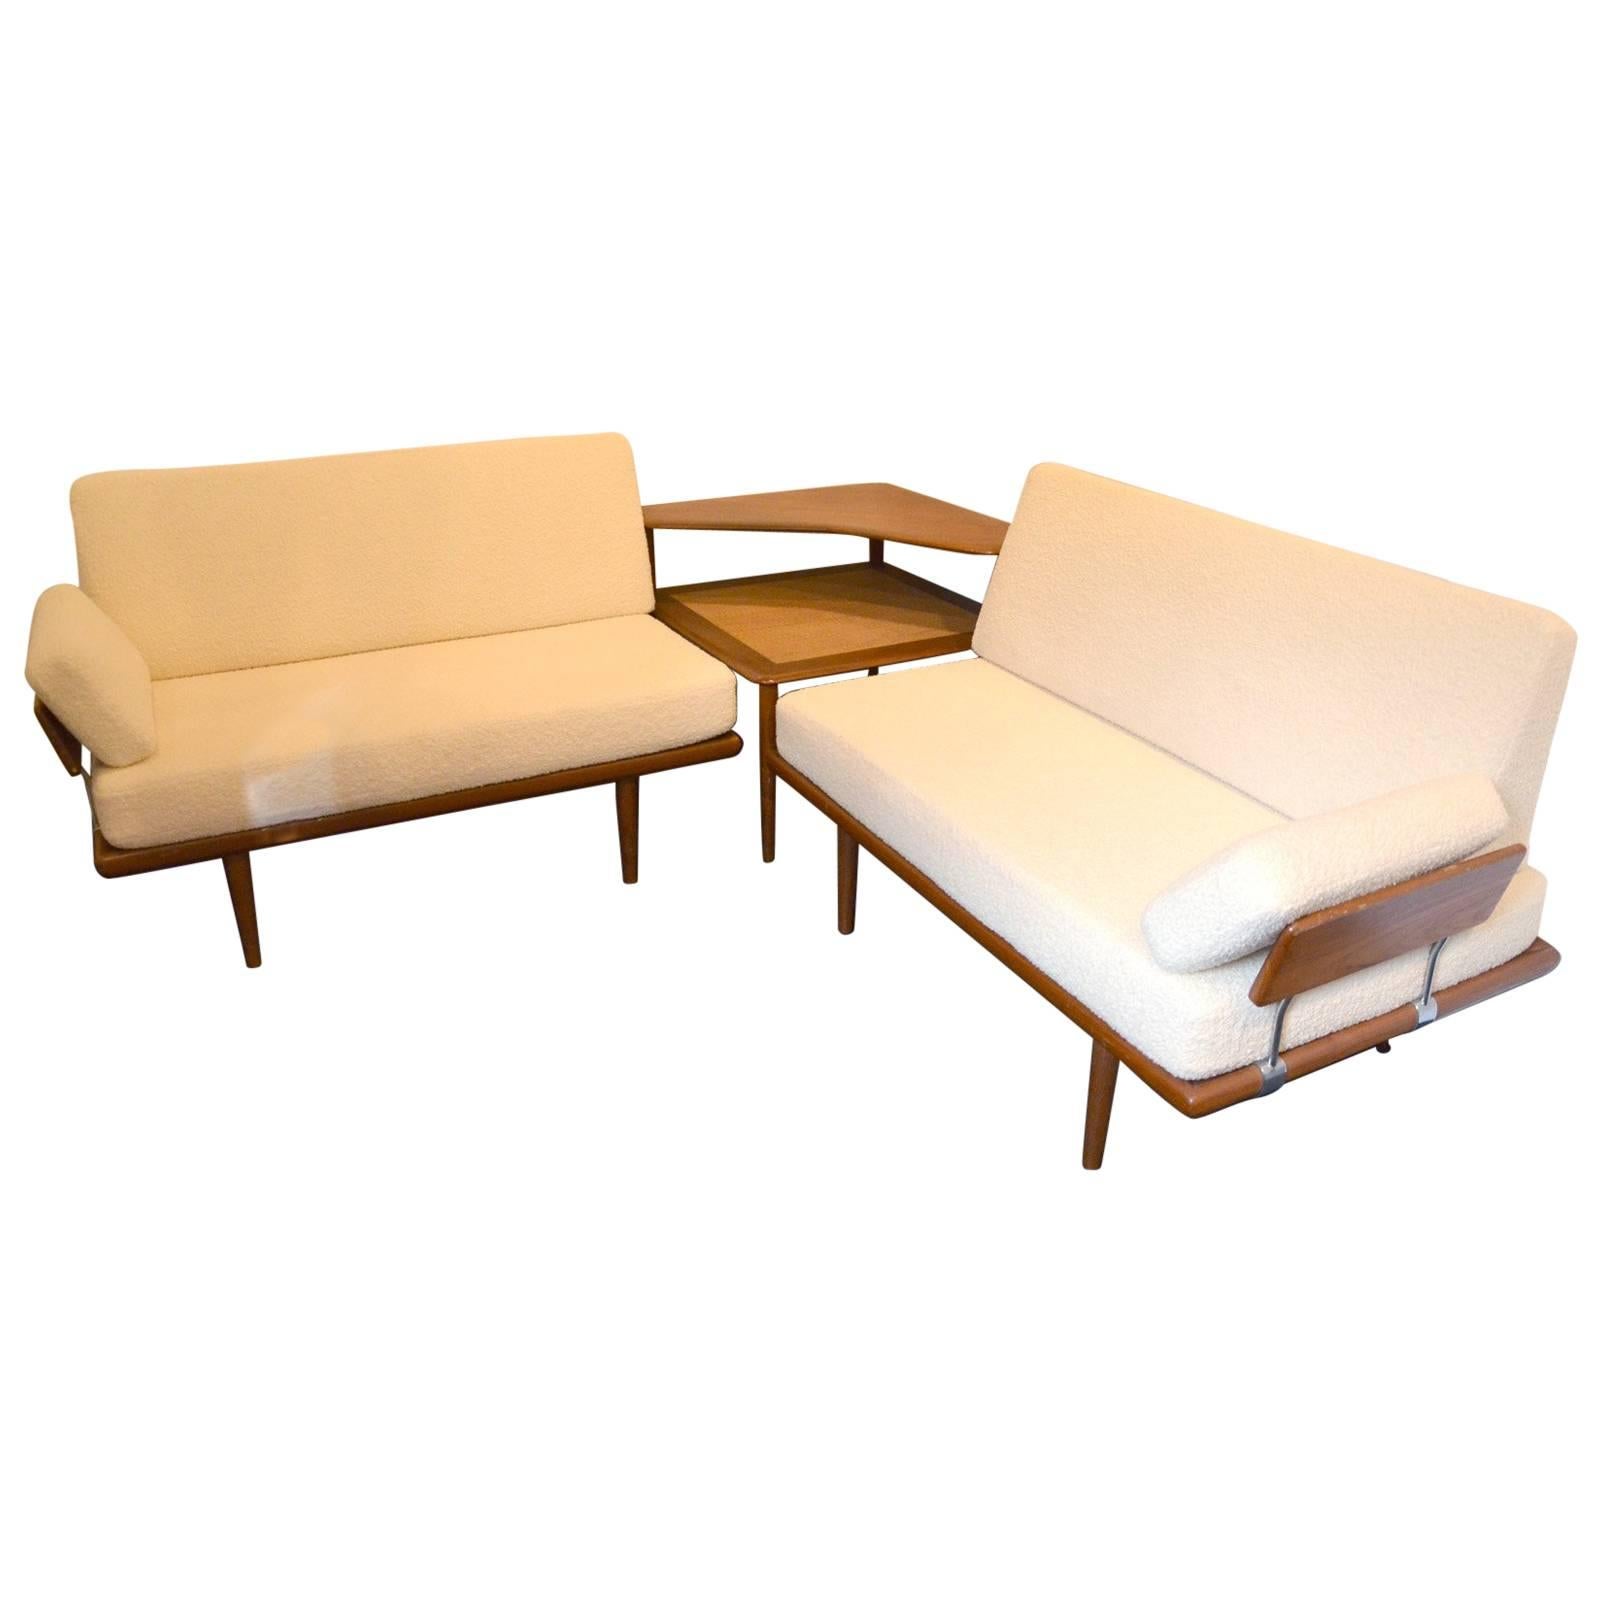 Huge Peter Hvidt Set of Table and Banquette Daybed, circa 1960 For Sale